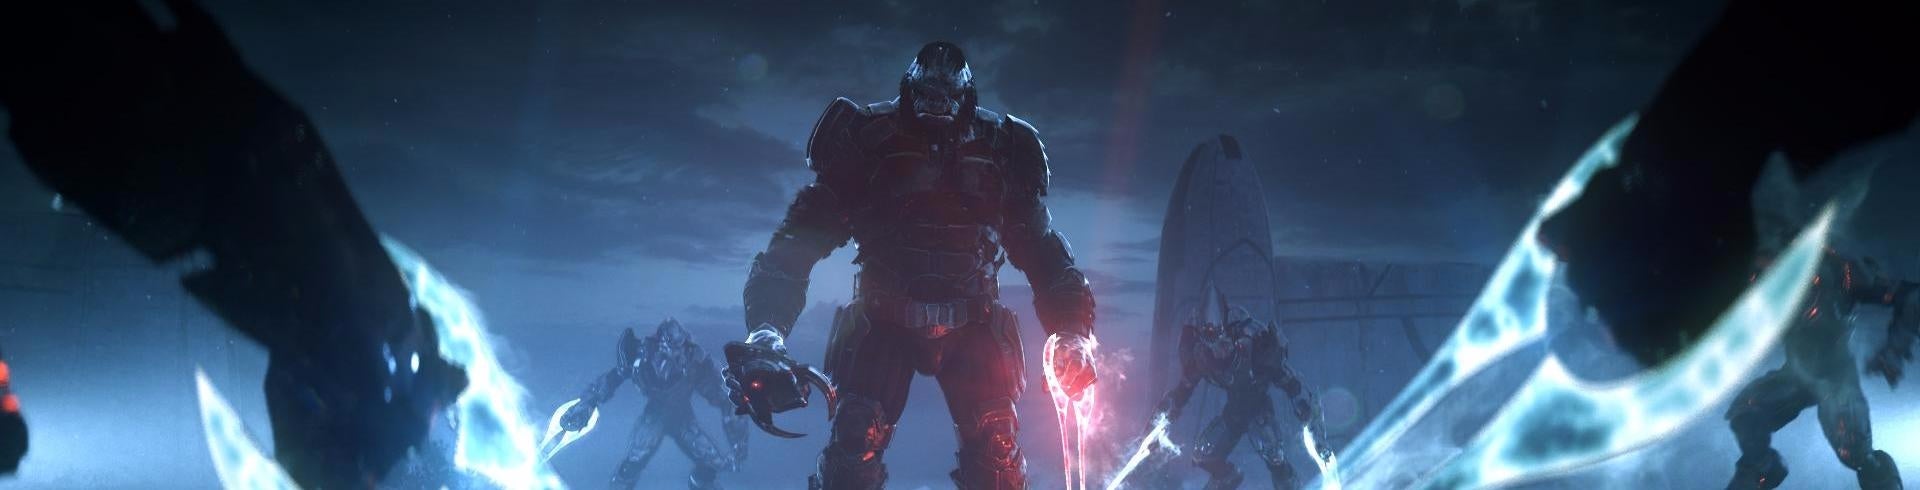 Image for Halo Wars 2 benefits from the experience of Creative Assembly